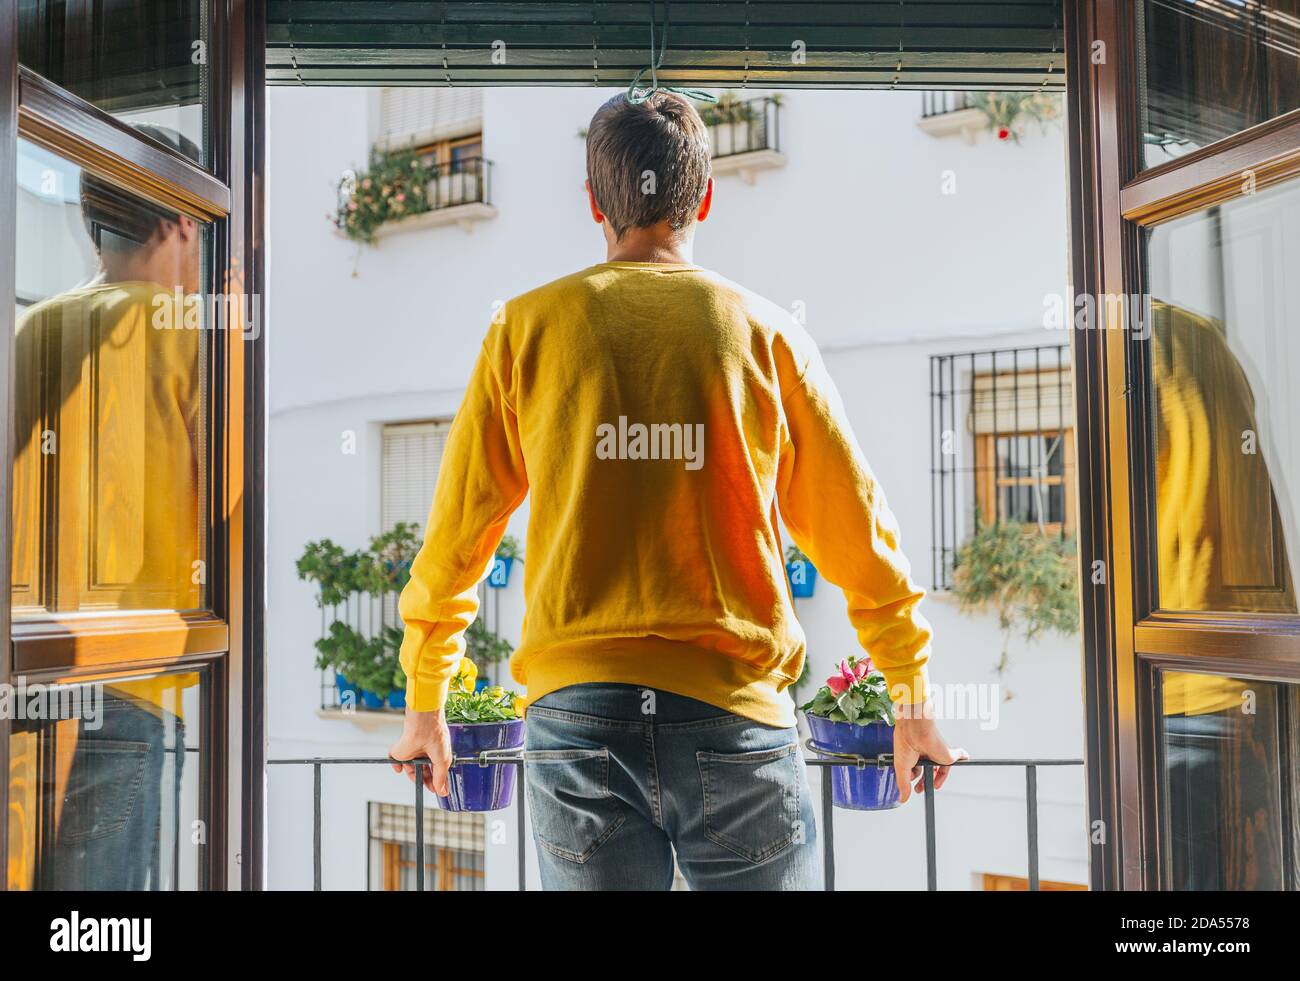 The boy standing on a balcony overlooking the street of potted windows with a yellow sweatshirt Stock Photo